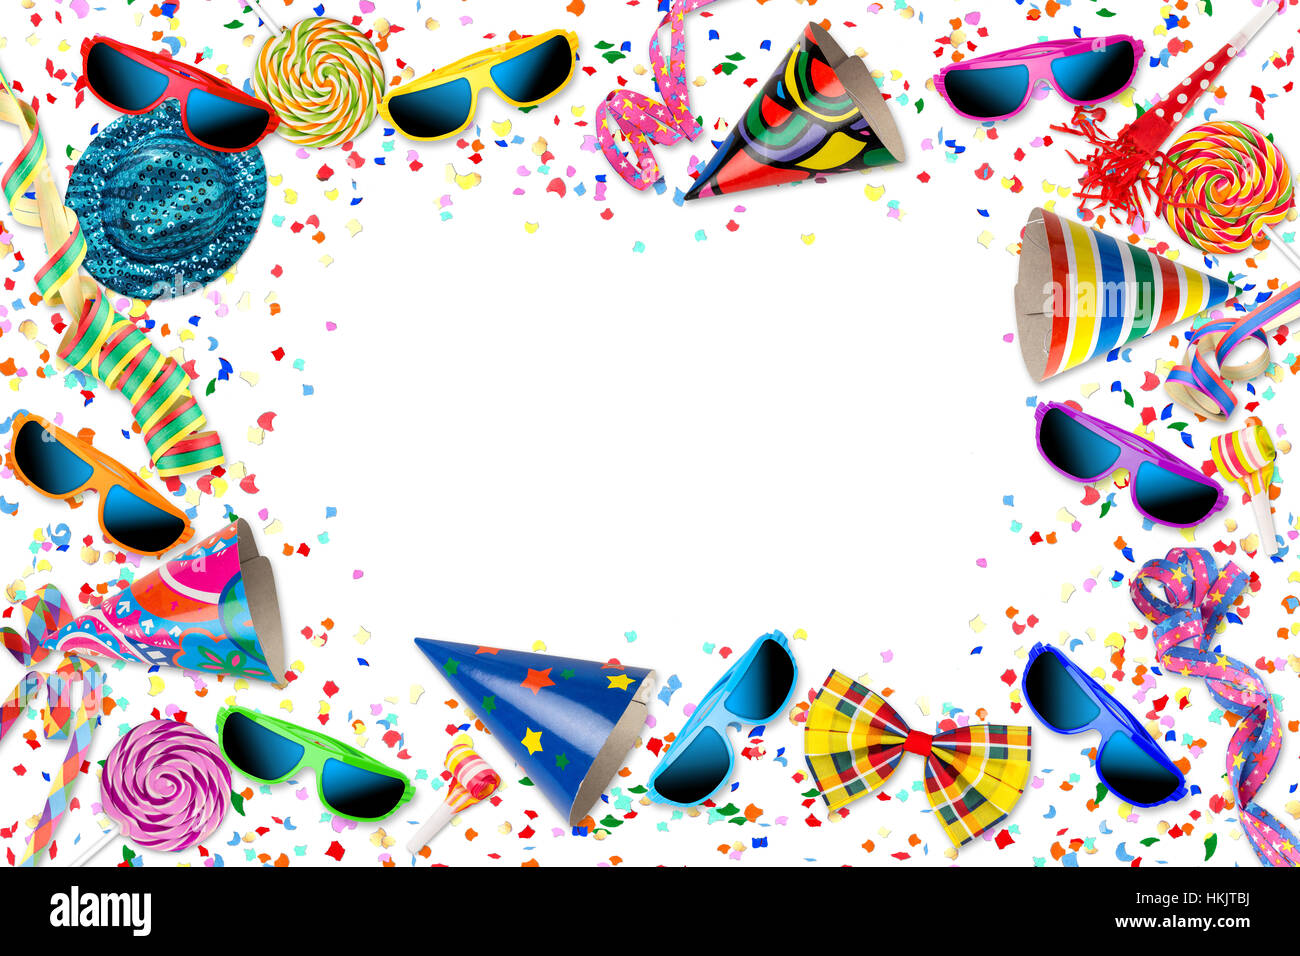 colorful party carnival birthday celebration background with colorful streamer candy lolly pop sunglasses confetti hat lolly pop isolated on white Stock Photo